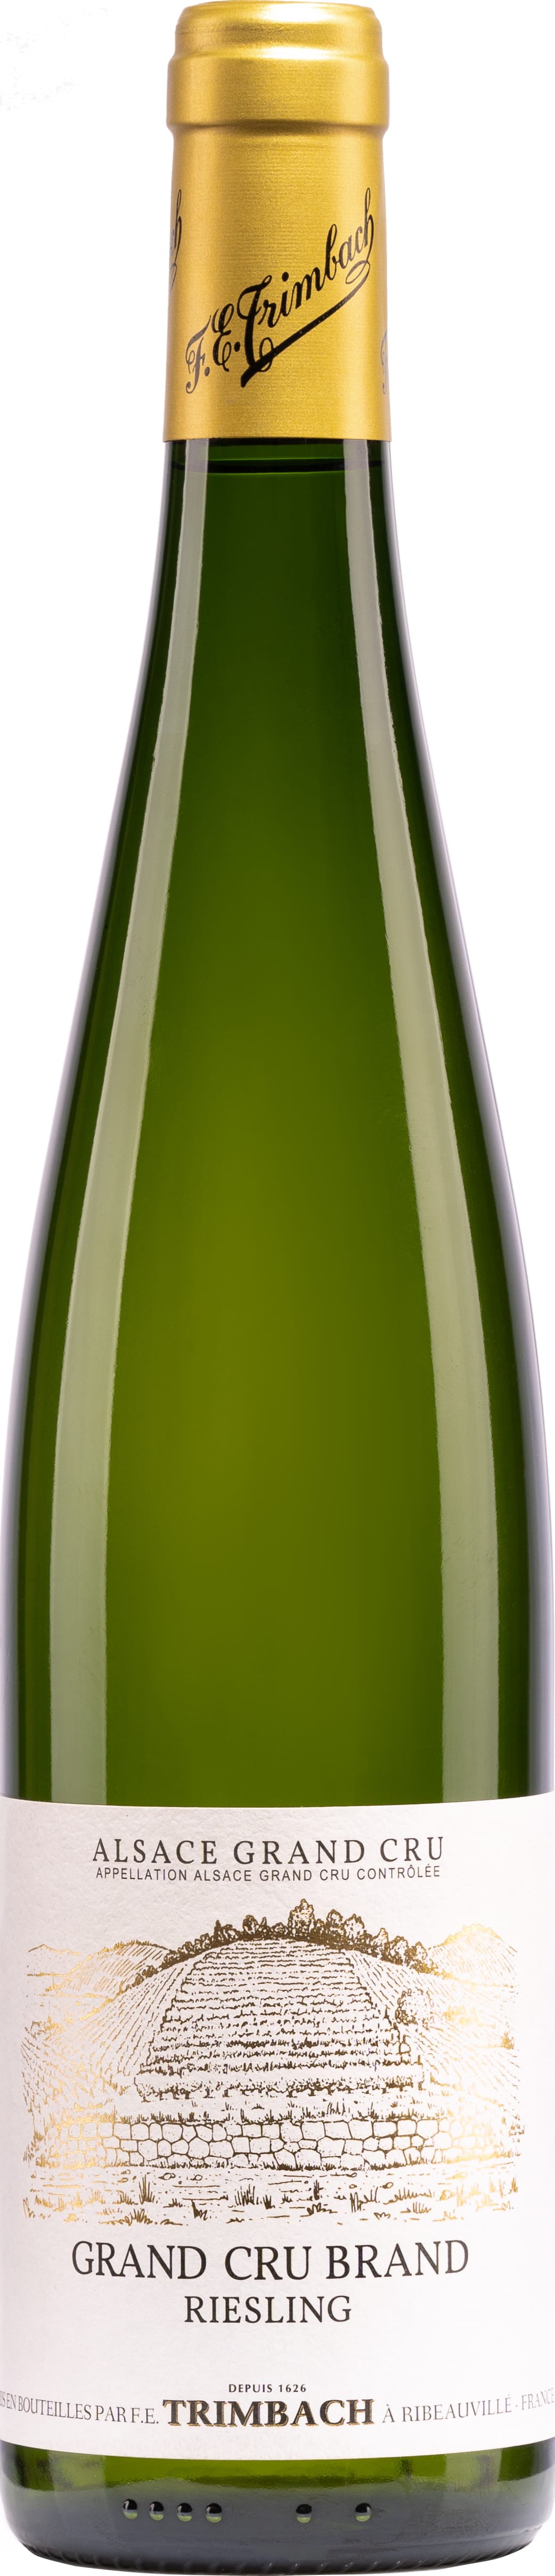 Trimbach Riesling Grand Cru Brand 2018 75cl - Buy Trimbach Wines from GREAT WINES DIRECT wine shop